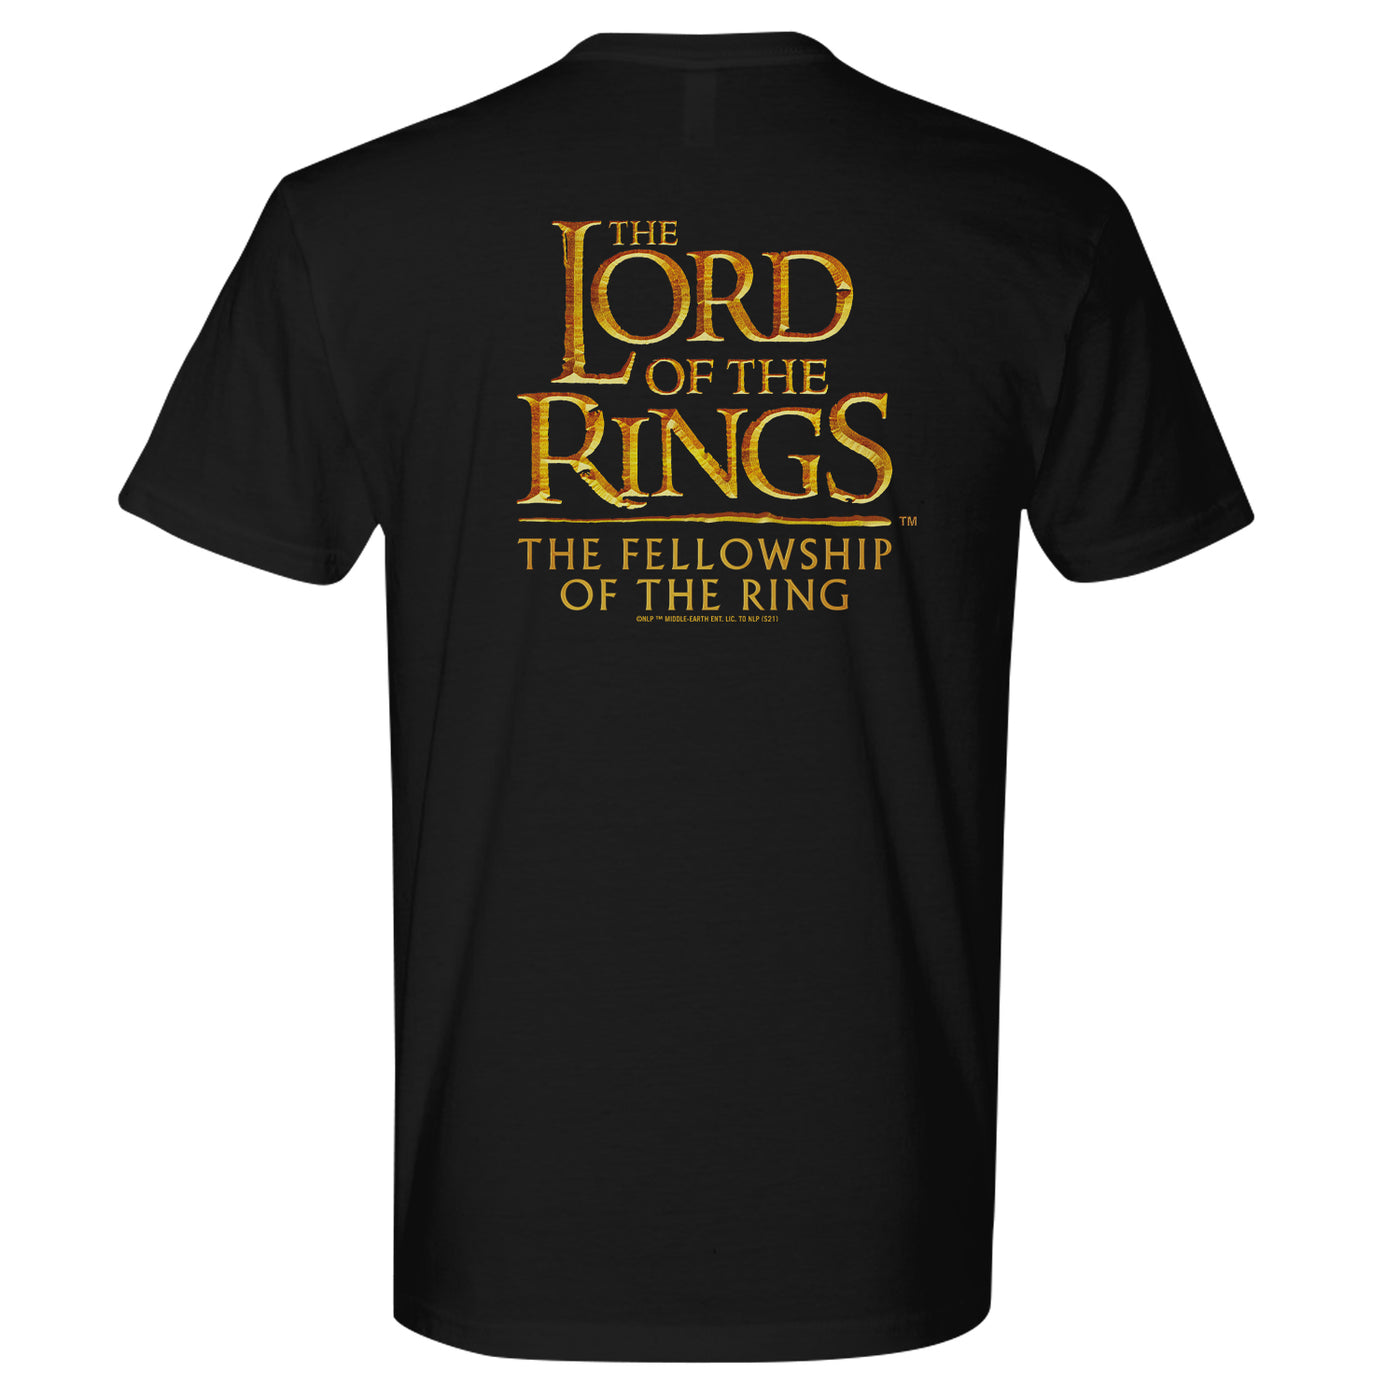 The Lord of the Rings 20th Anniversary The Fellowship of the Ring T-Shirt